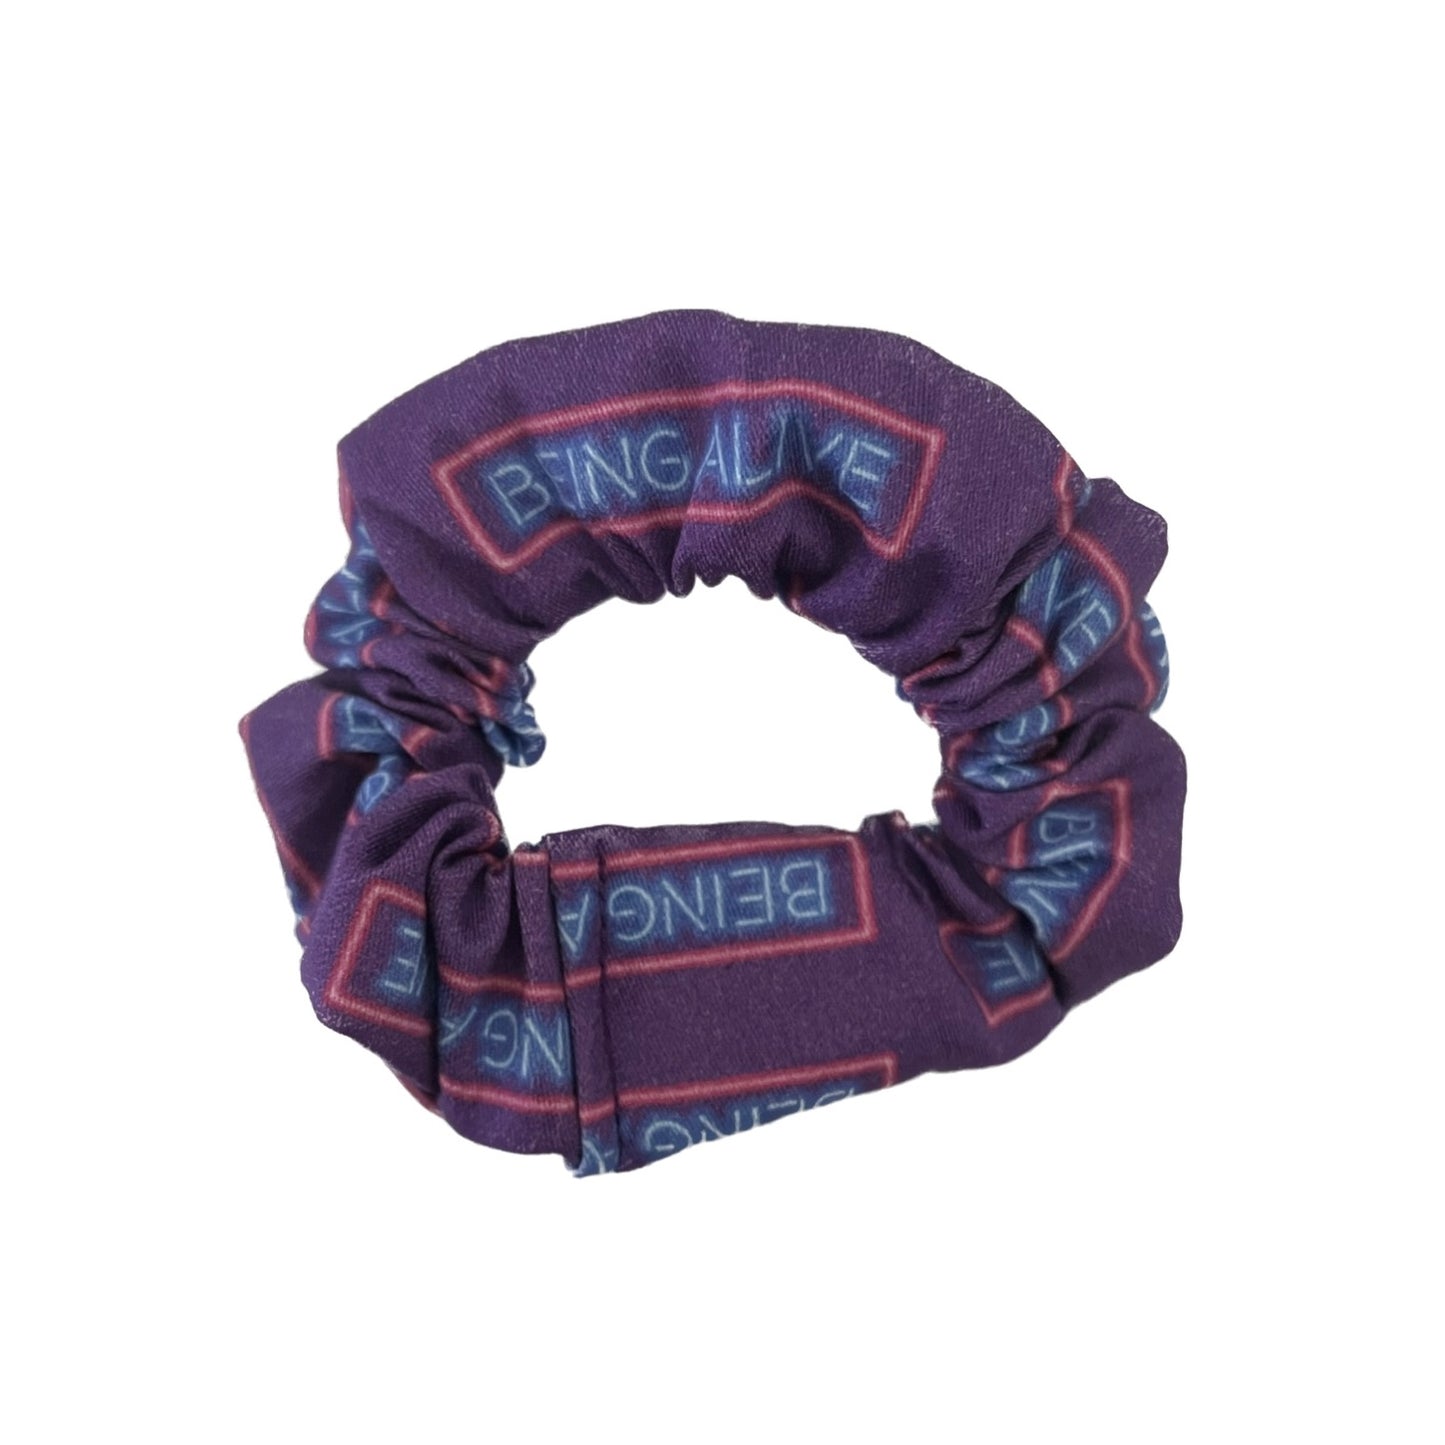 Being Alive Scrunchie - Inspired by Company